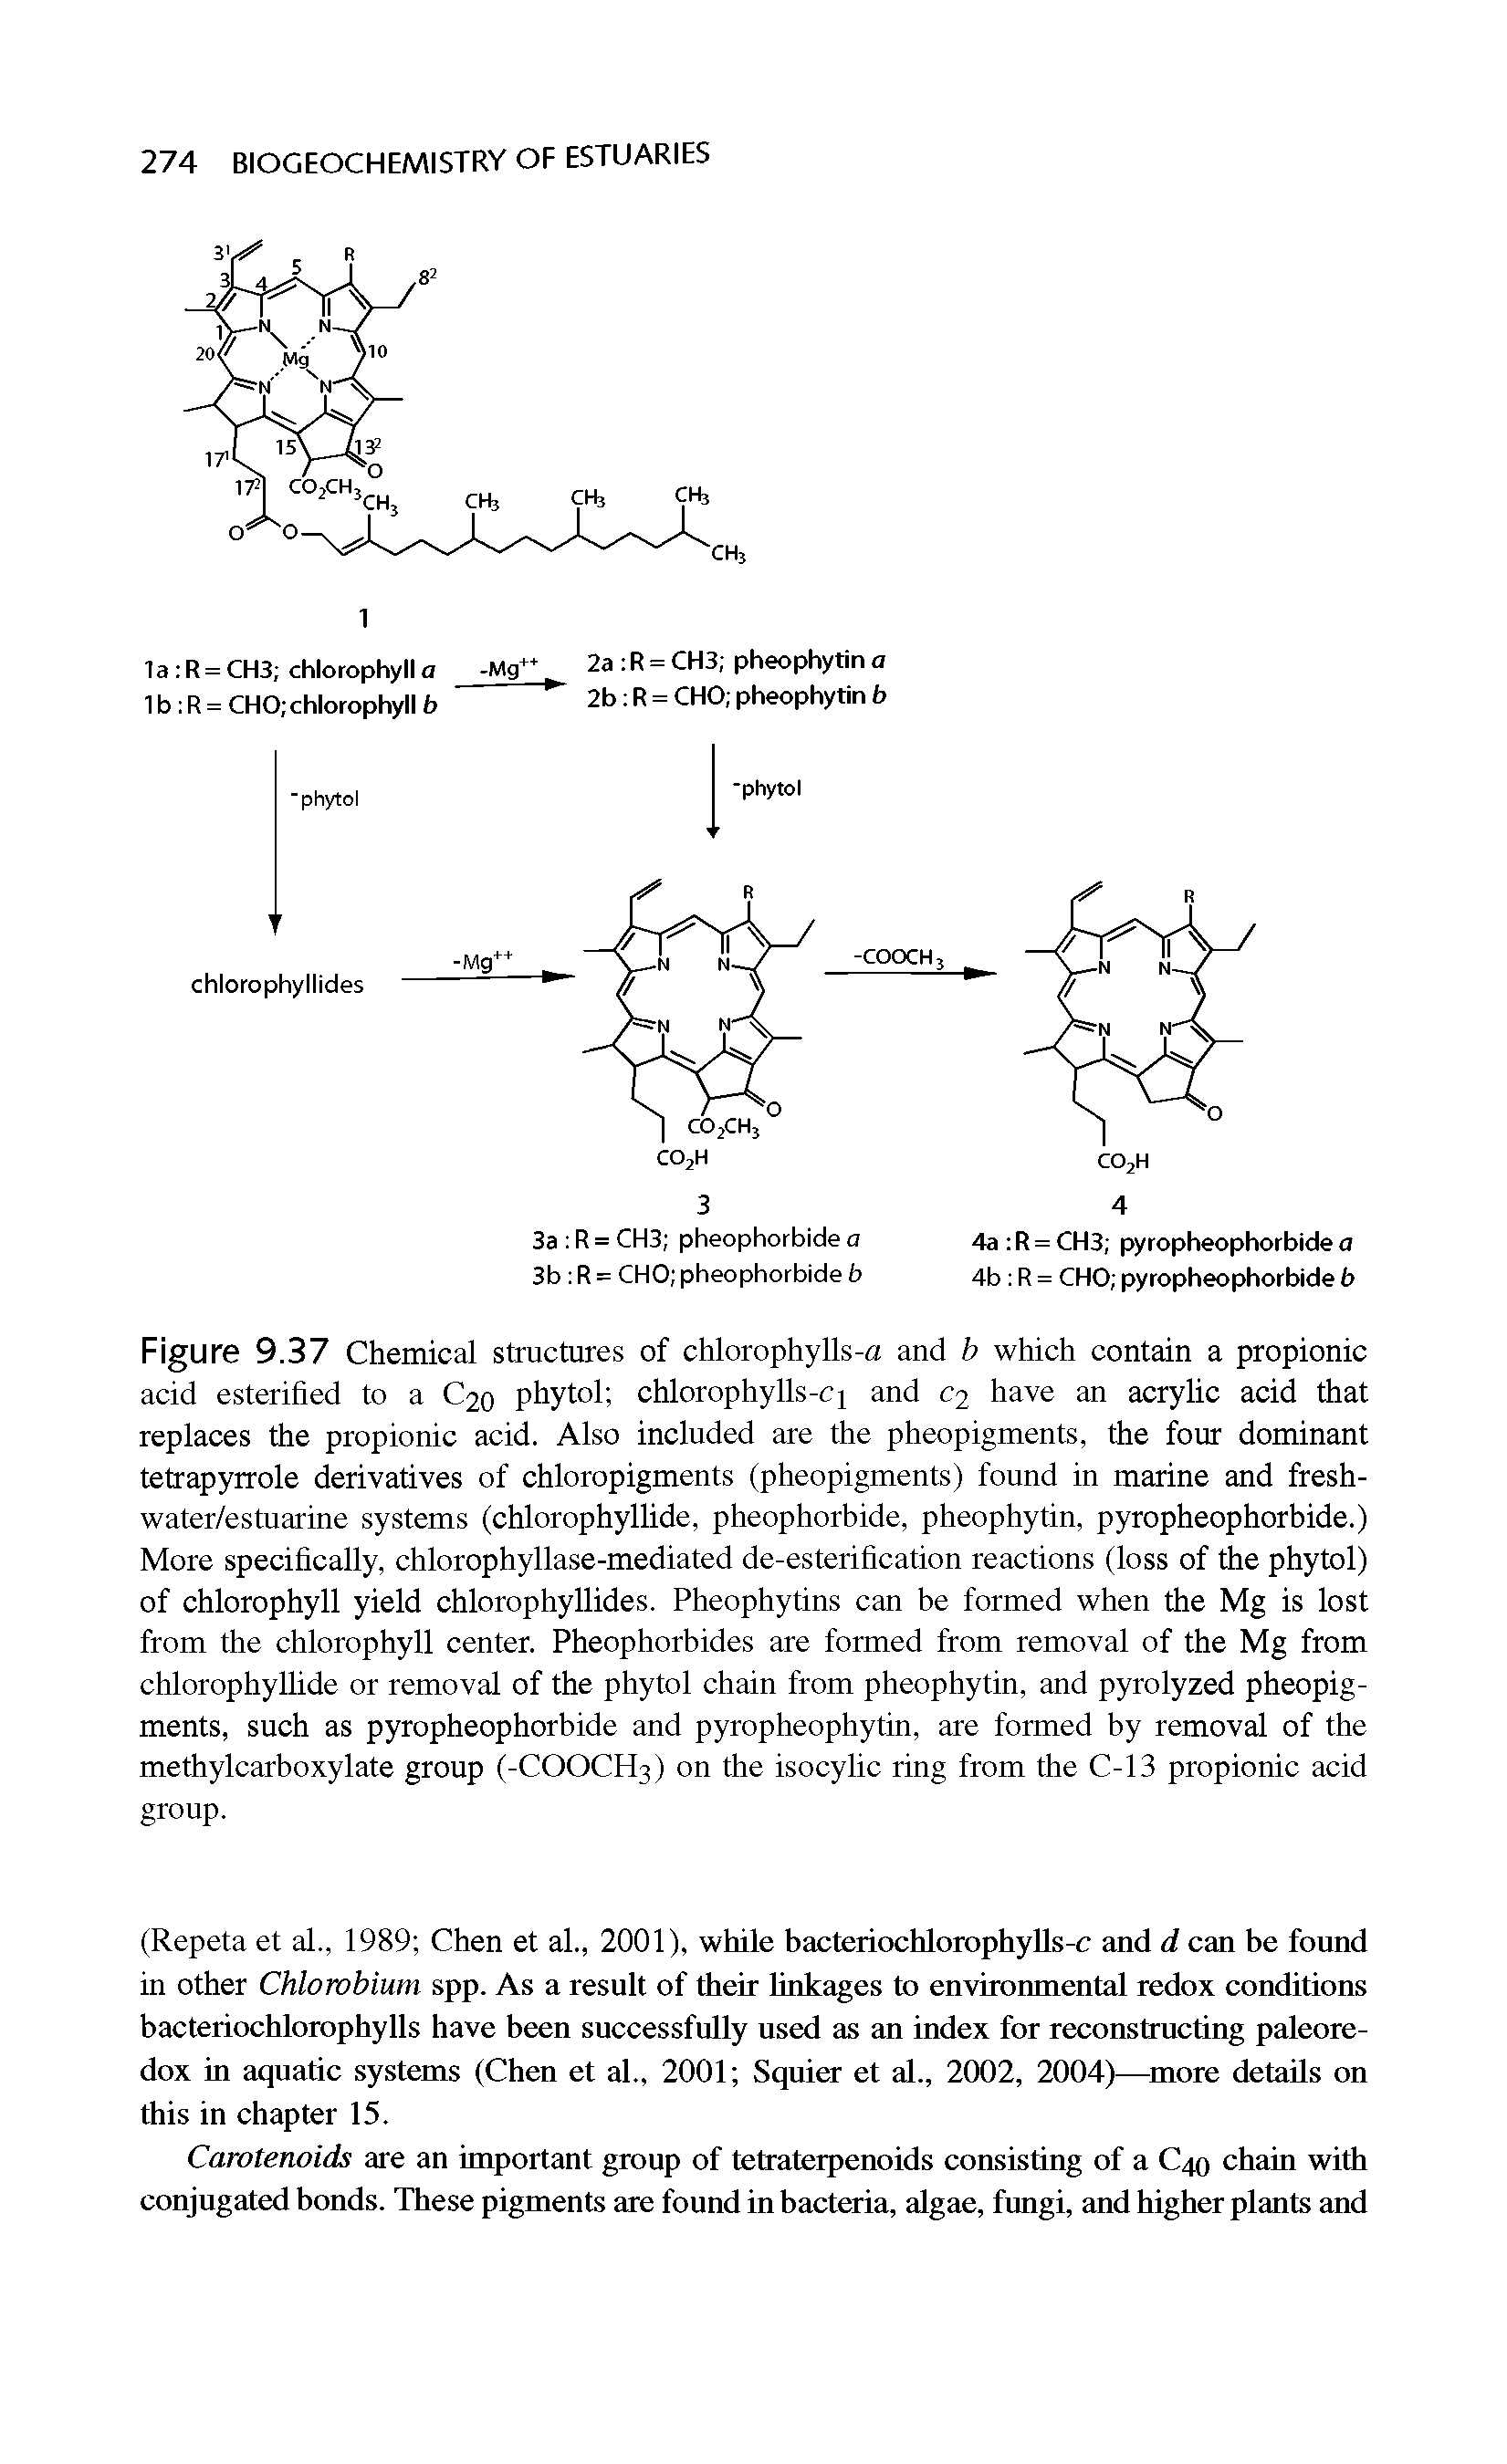 Figure 9.37 Chemical structures of chlorophylls-a and b which contain a propionic acid esterified to a C20 phytol chlorophylls-cj and C2 have an acrylic acid that replaces the propionic acid. Also included are the pheopigments, the four dominant tetrapyrrole derivatives of chloropigments (pheopigments) found in marine and fresh-water/estuarine systems (chlorophyllide, pheophorbide, pheophytin, pyropheophorbide.) More specifically, chlorophyllase-mediated de-esterification reactions (loss of the phytol) of chlorophyll yield chlorophyllides. Pheophytins can be formed when the Mg is lost from the chlorophyll center. Pheophorbides are formed from removal of the Mg from chlorophyllide or removal of the phytol chain from pheophytin, and pyrolyzed pheopigments, such as pyropheophorbide and pyropheophytin, are formed by removal of the methylcarboxylate group (-COOCH3) on the isocylic ring from the C-13 propionic acid group.